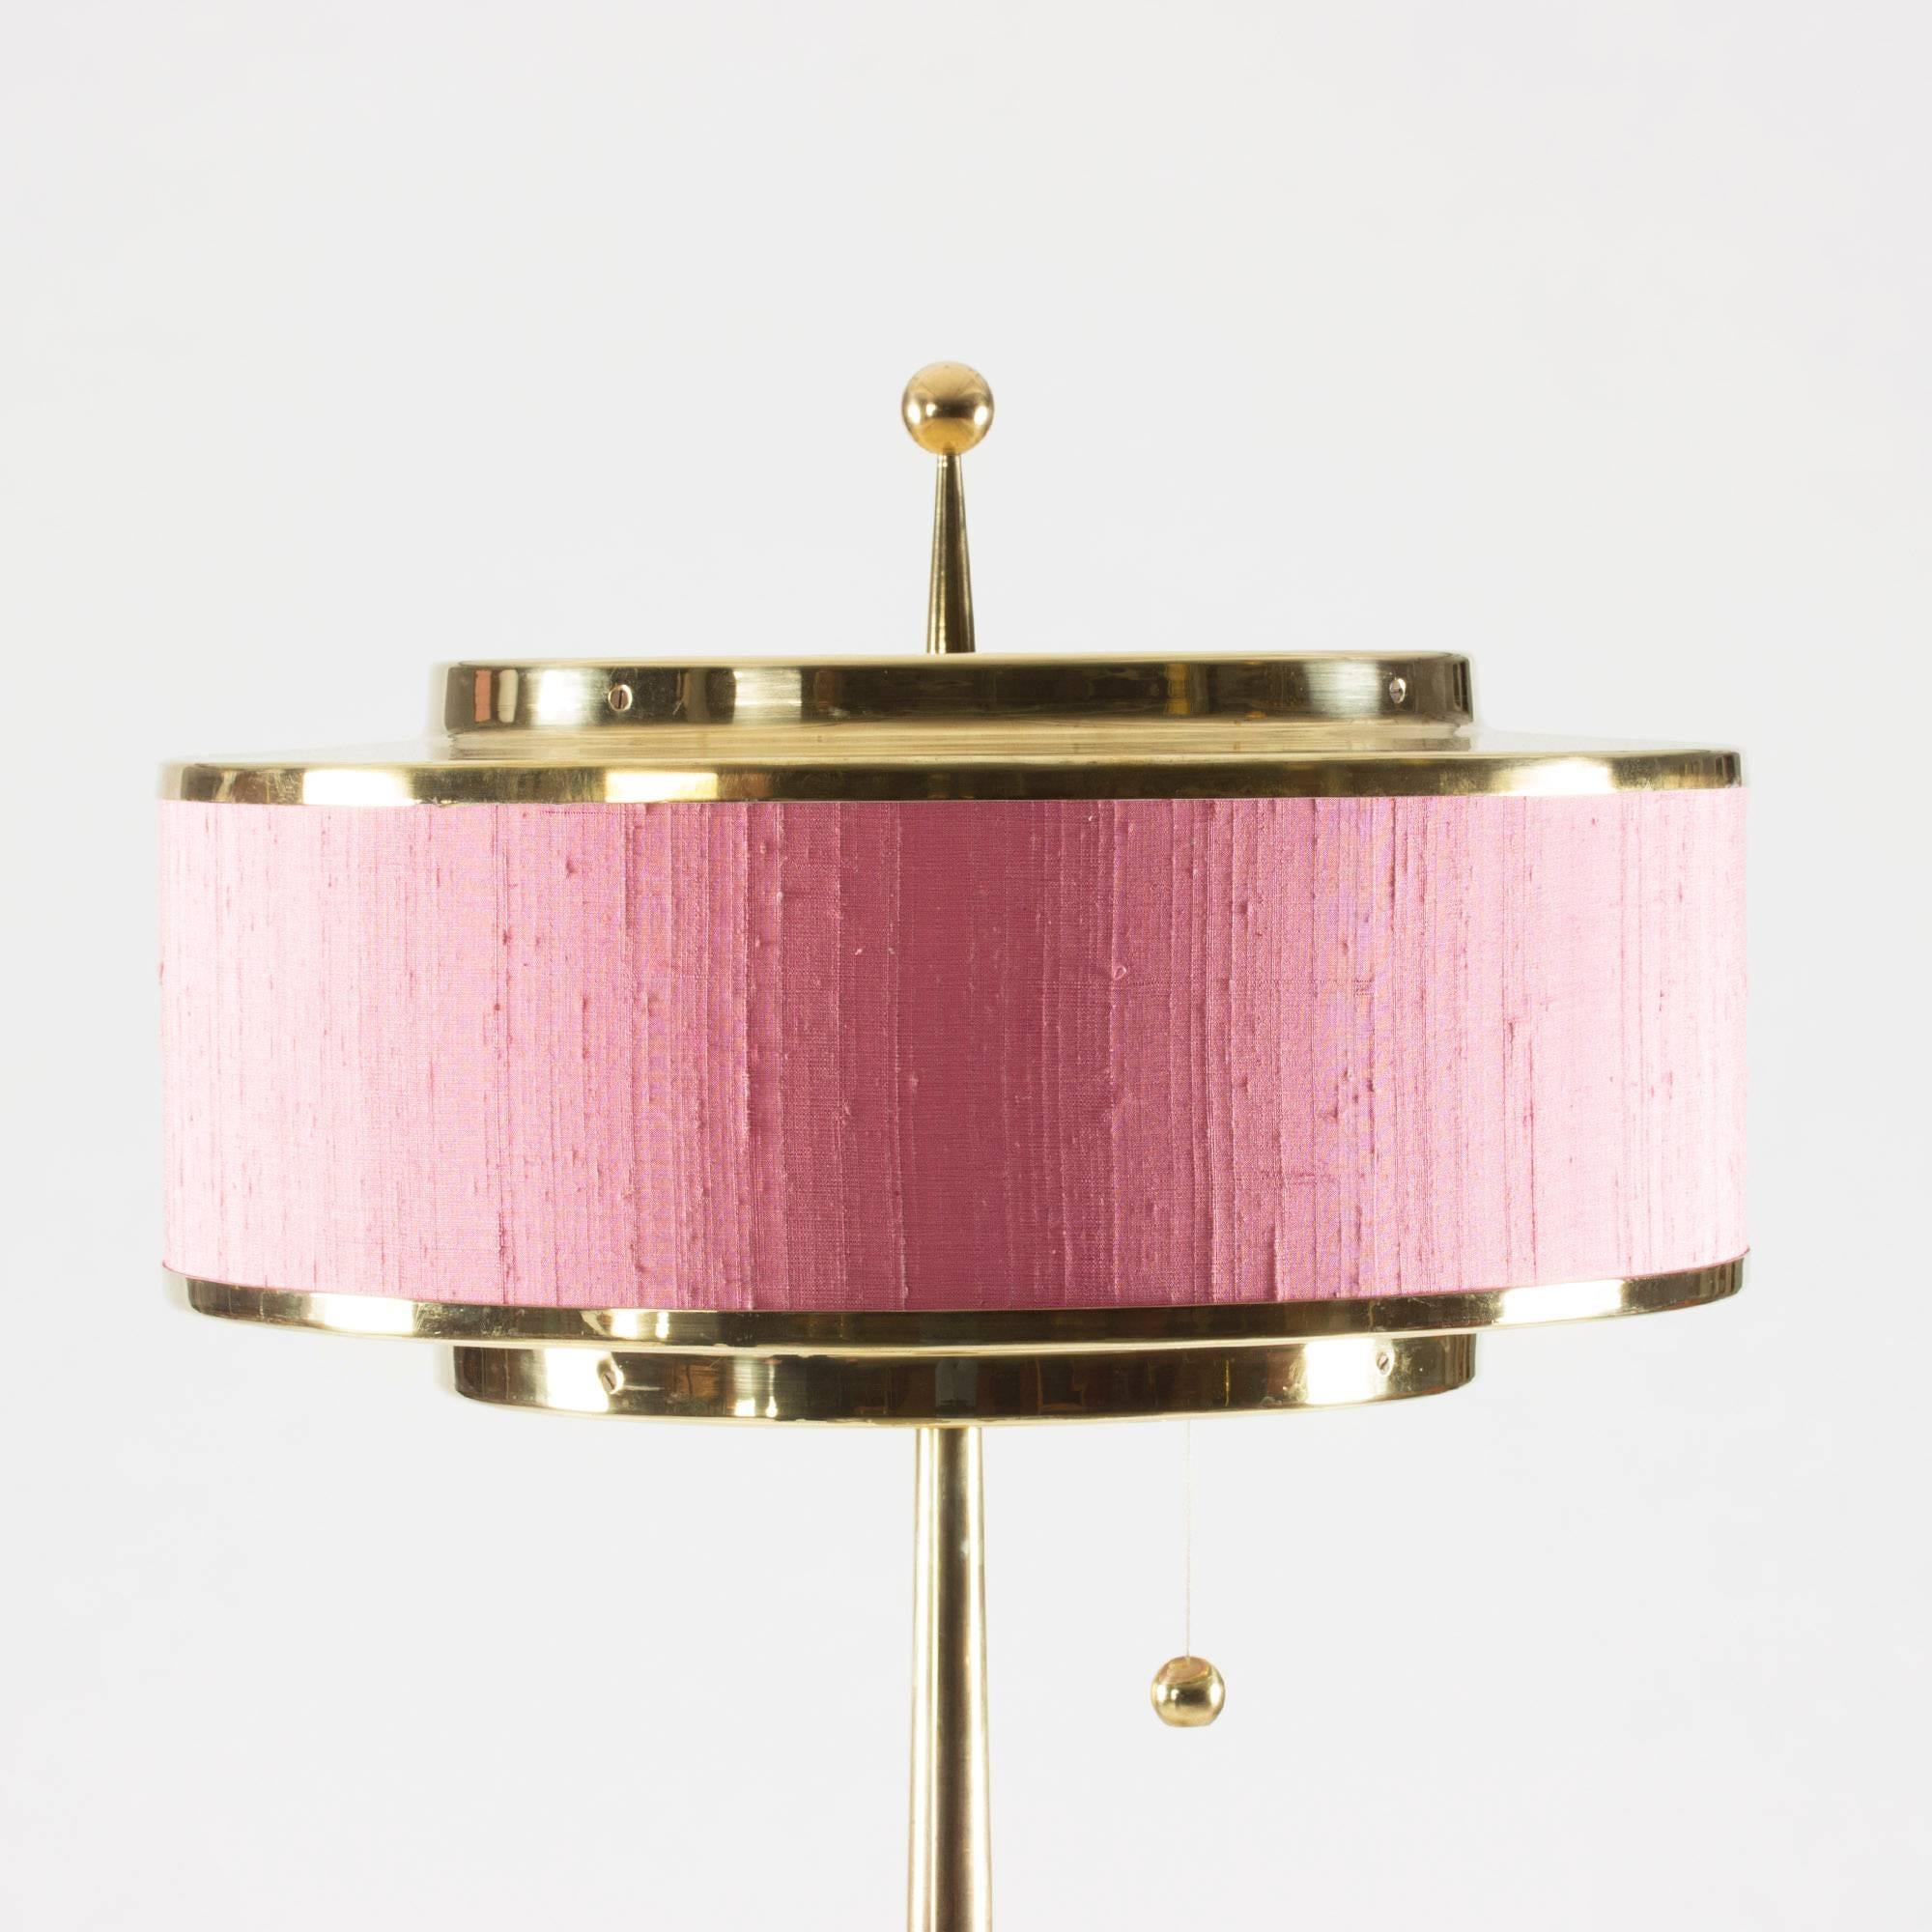 Oversized brass table lamp by Hans-Agne Jakobsson. Unusually tall and perfect proportions, and a lampshade that grants this statement piece both Space Age and oriental vibes. Reupholstered with pink raw silk.